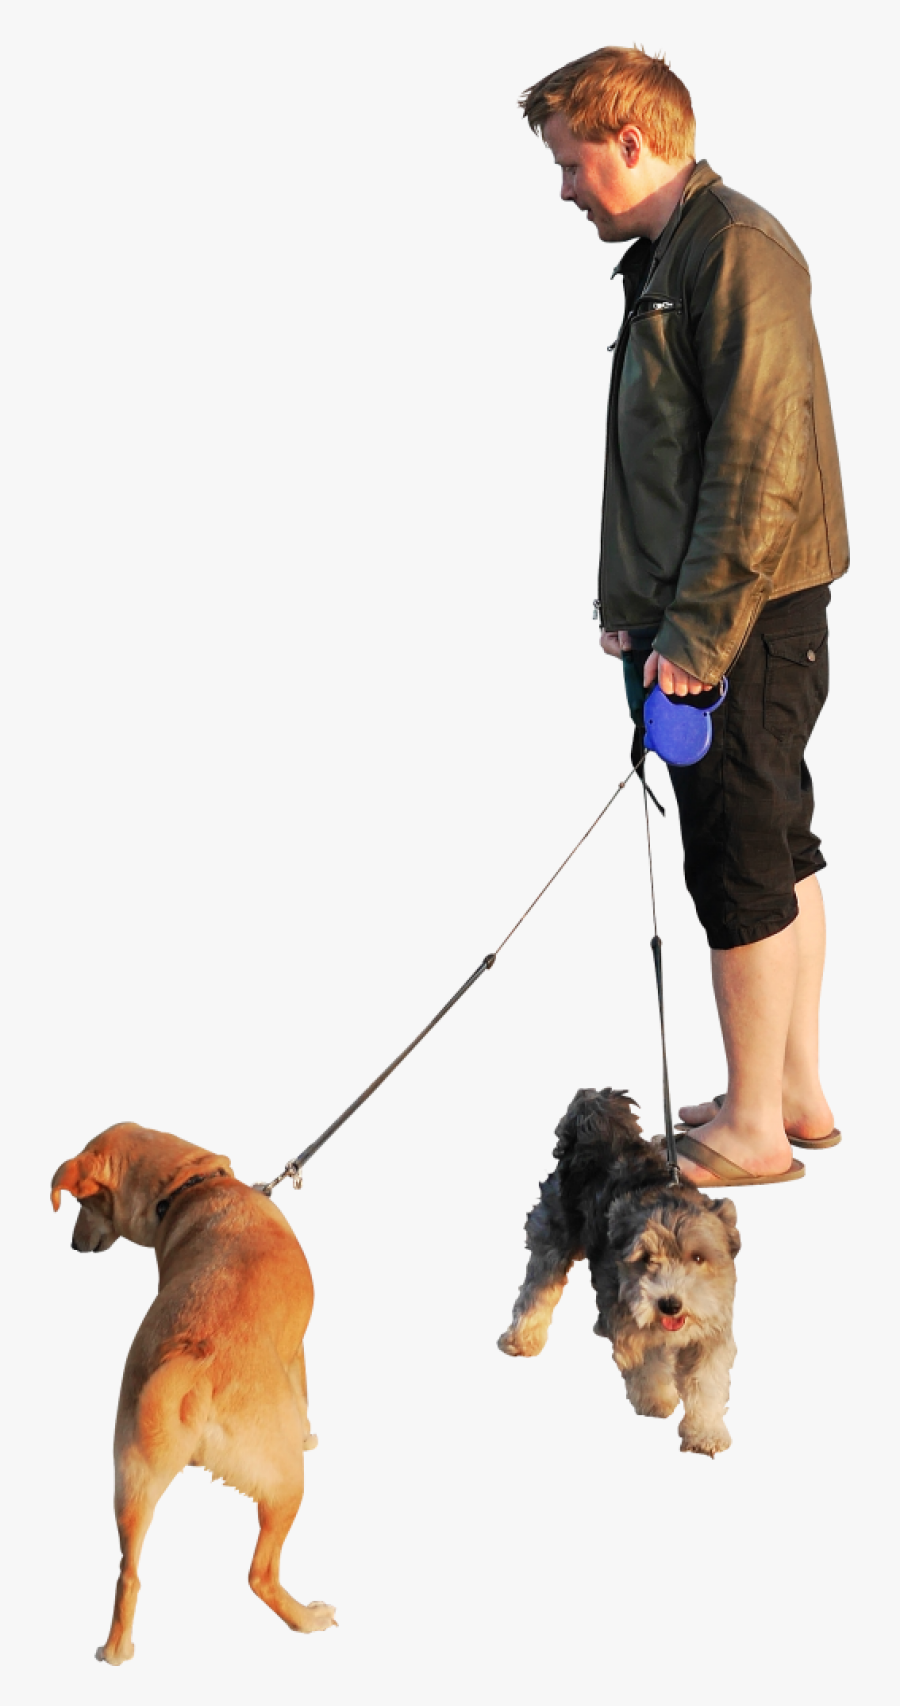 Dogs Beach Sunset Png Image - Dog Walking Png, Transparent Clipart